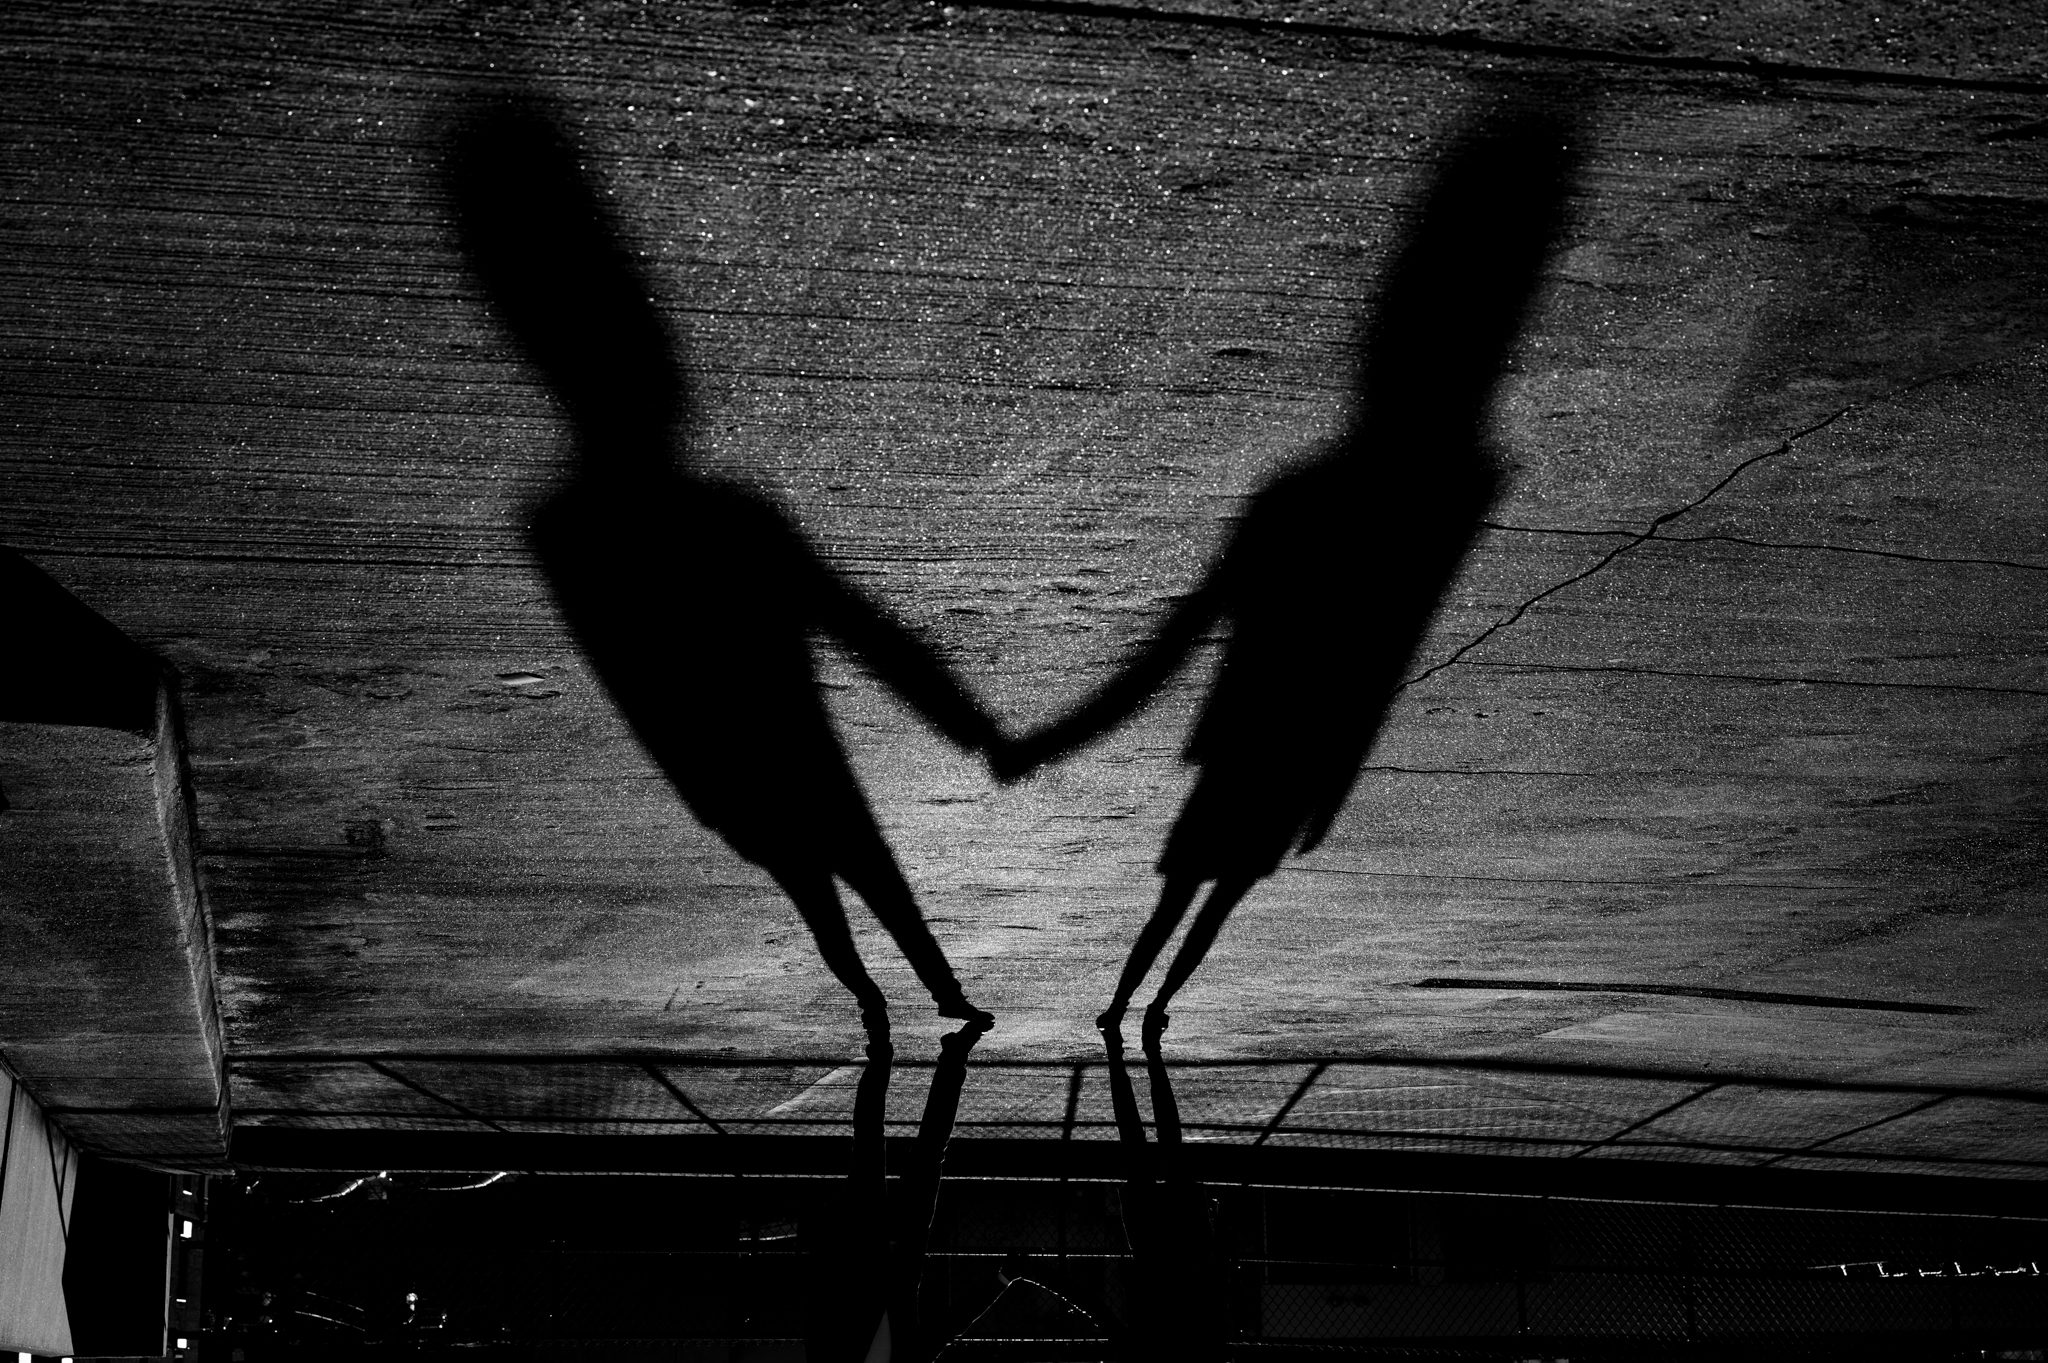 Enchanting engagement - Shadows of a couple holding hands, embraced in the heart of downtown Asheville